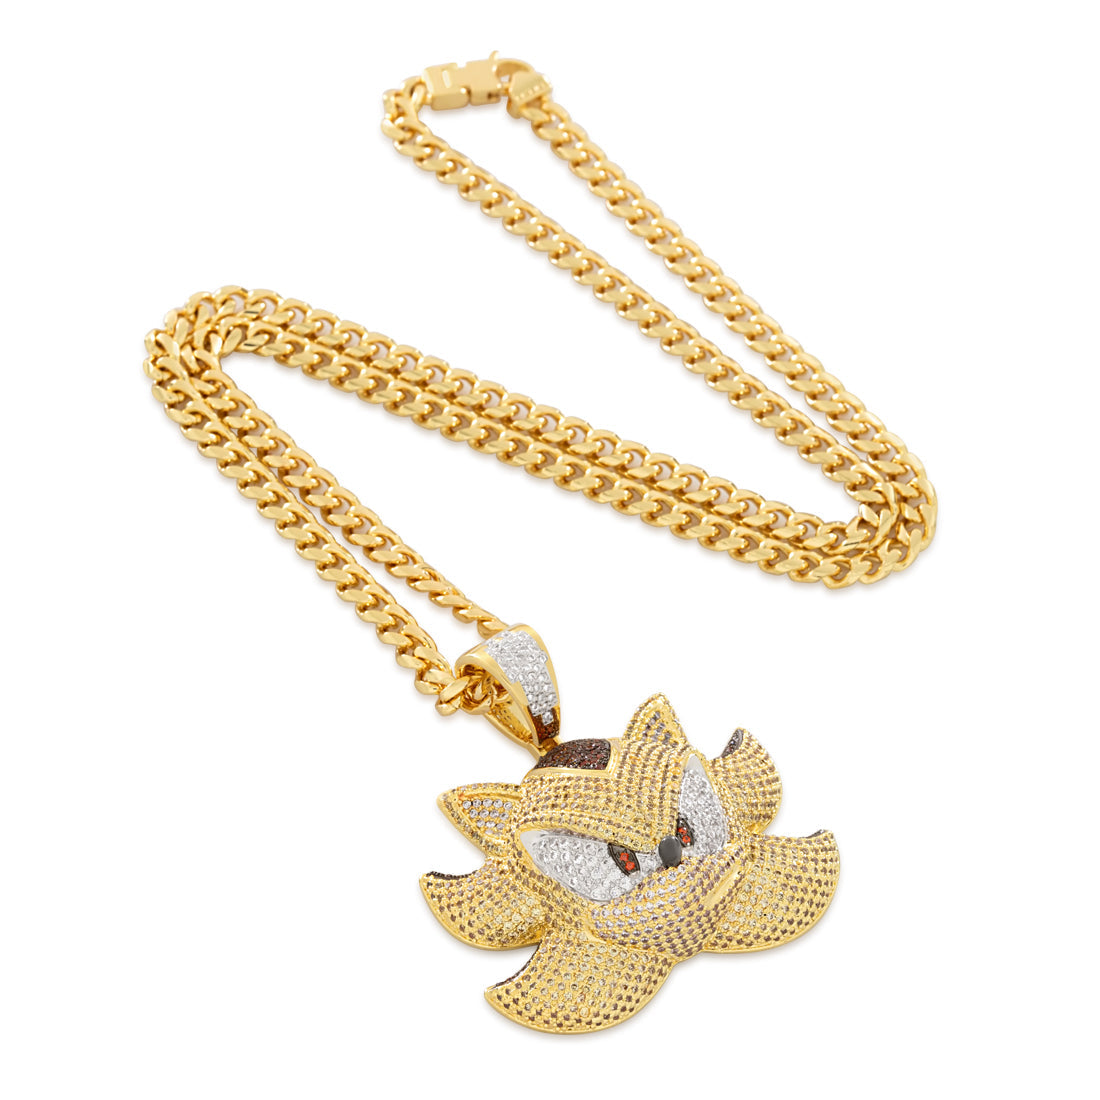 White Gold / 2" Sonic the Hedgehog x King Ice - Super Shadow Necklace